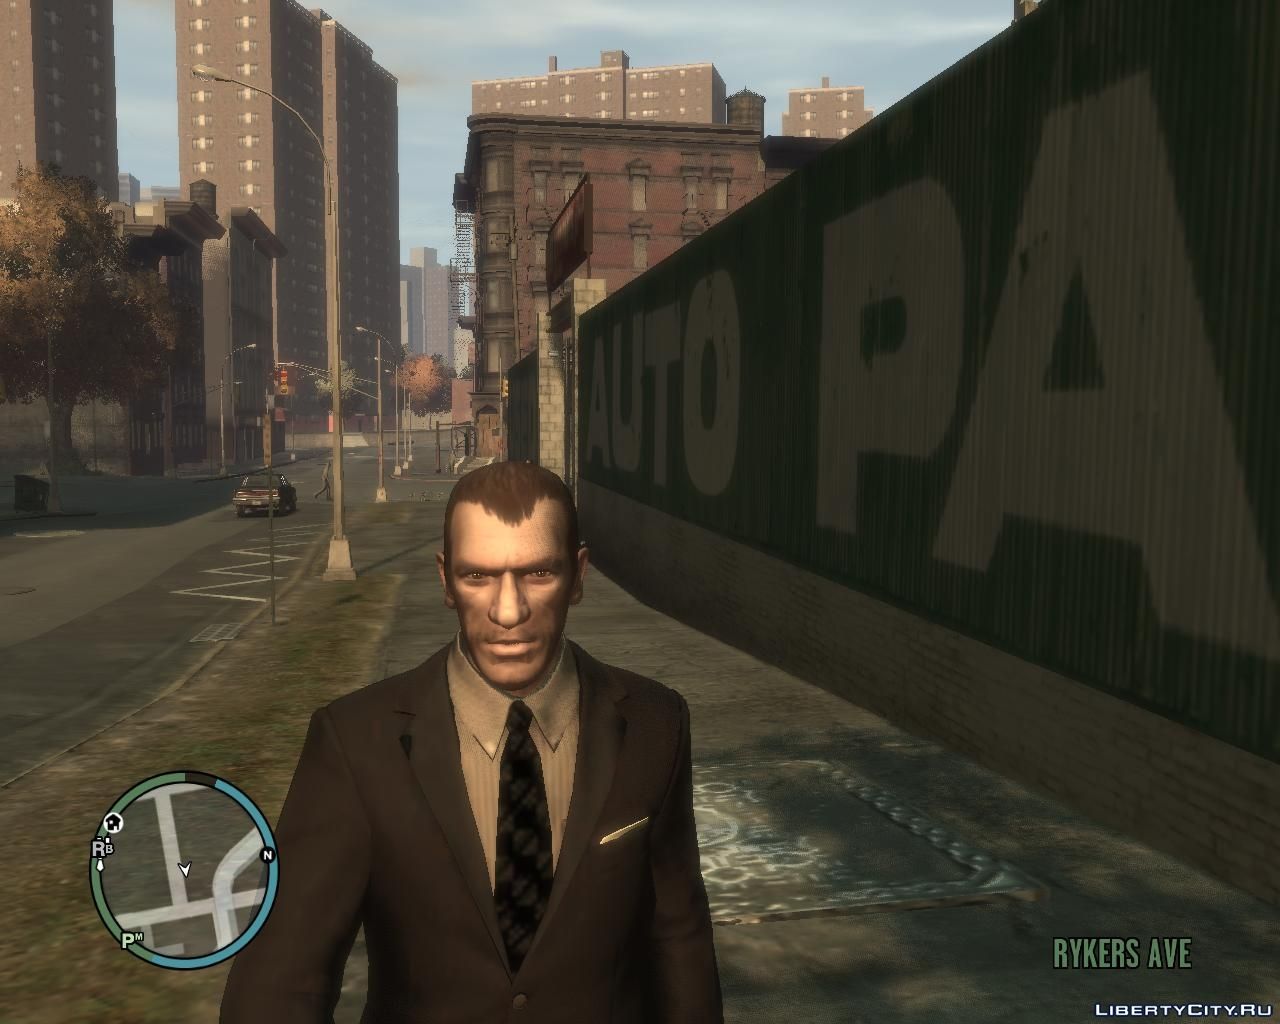 Players rush to download popular GTA 4 mod compilation following